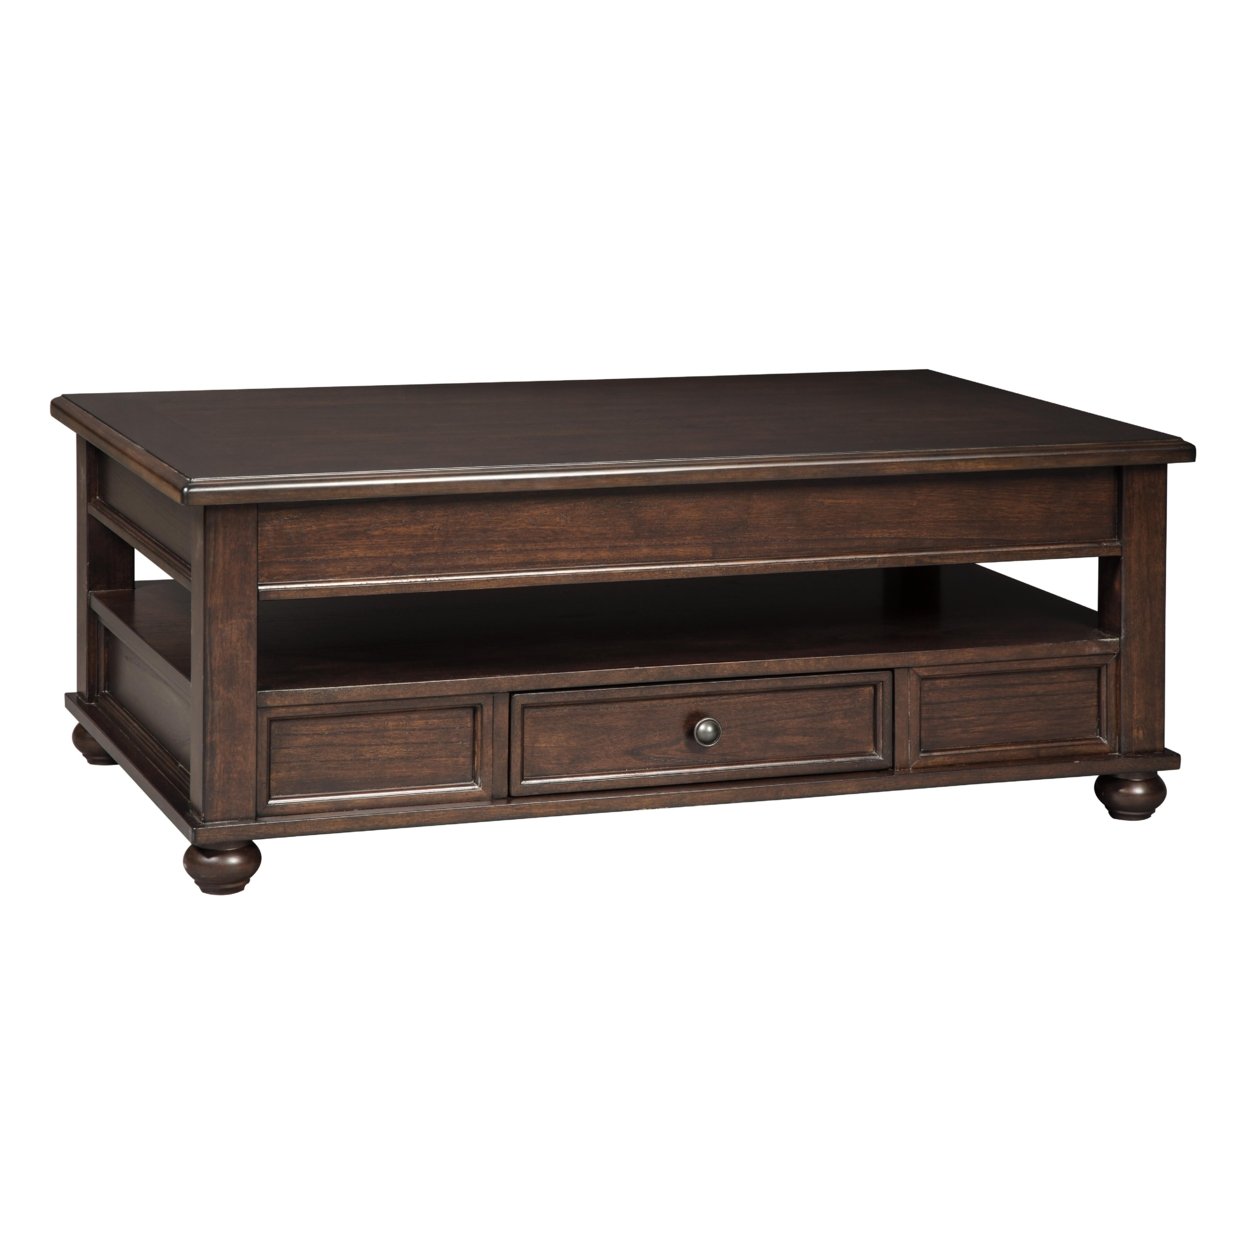 Wooden Lift Top Cocktail Table With 1 Drawer And Open Compartment, Brown- Saltoro Sherpi